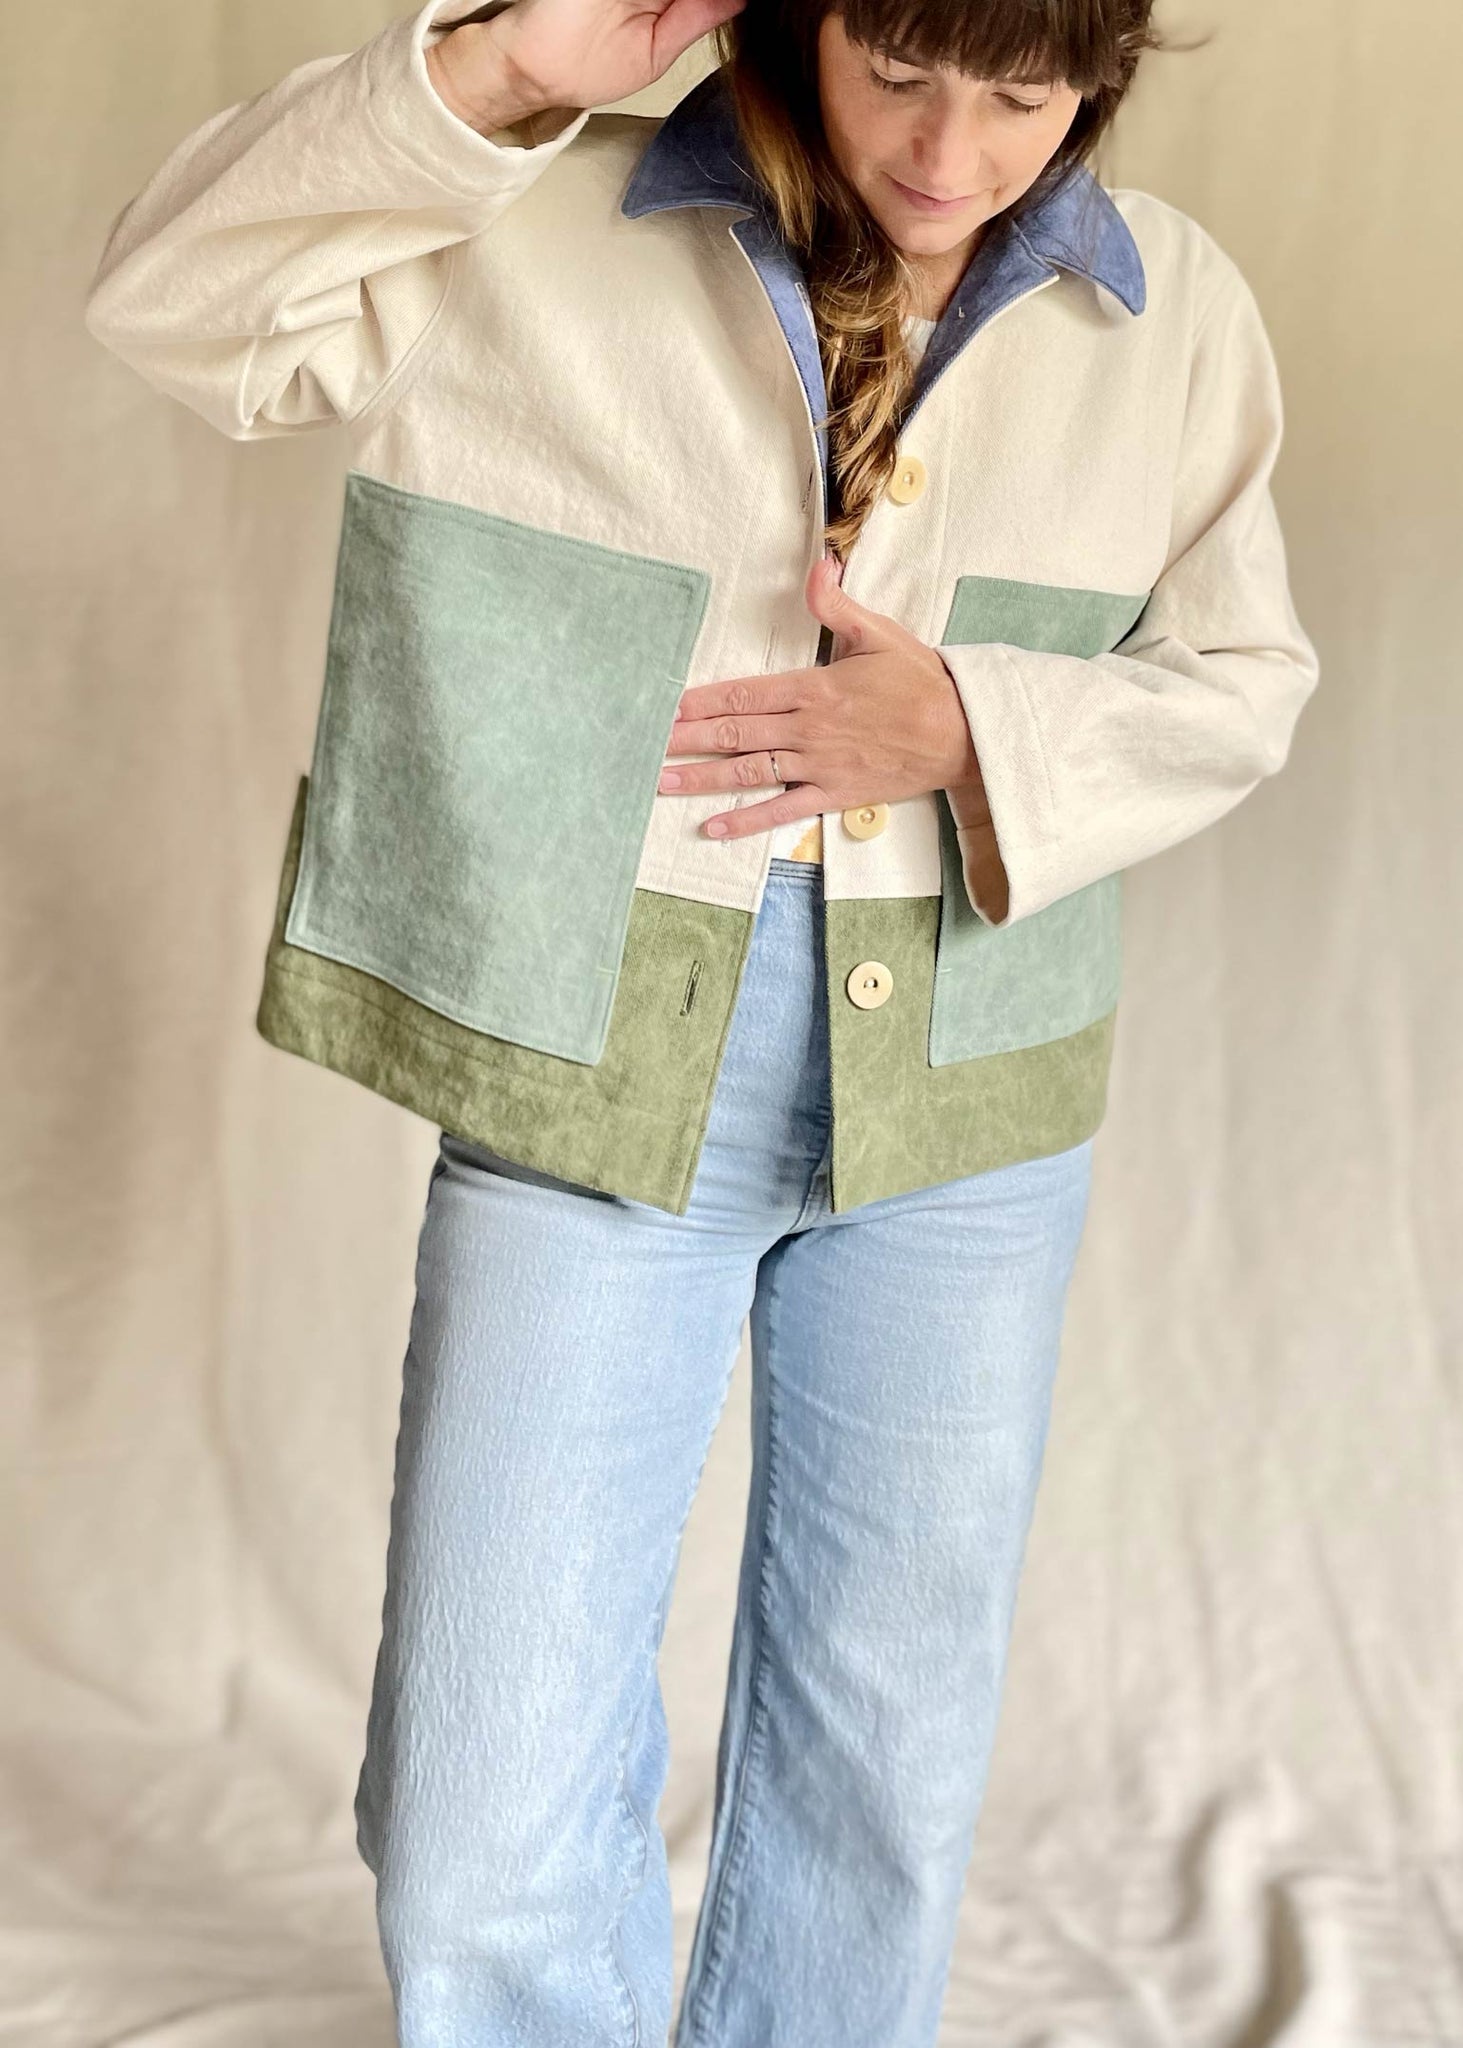 Made-to-order Color Block Jacket: Cream color body for Shaira